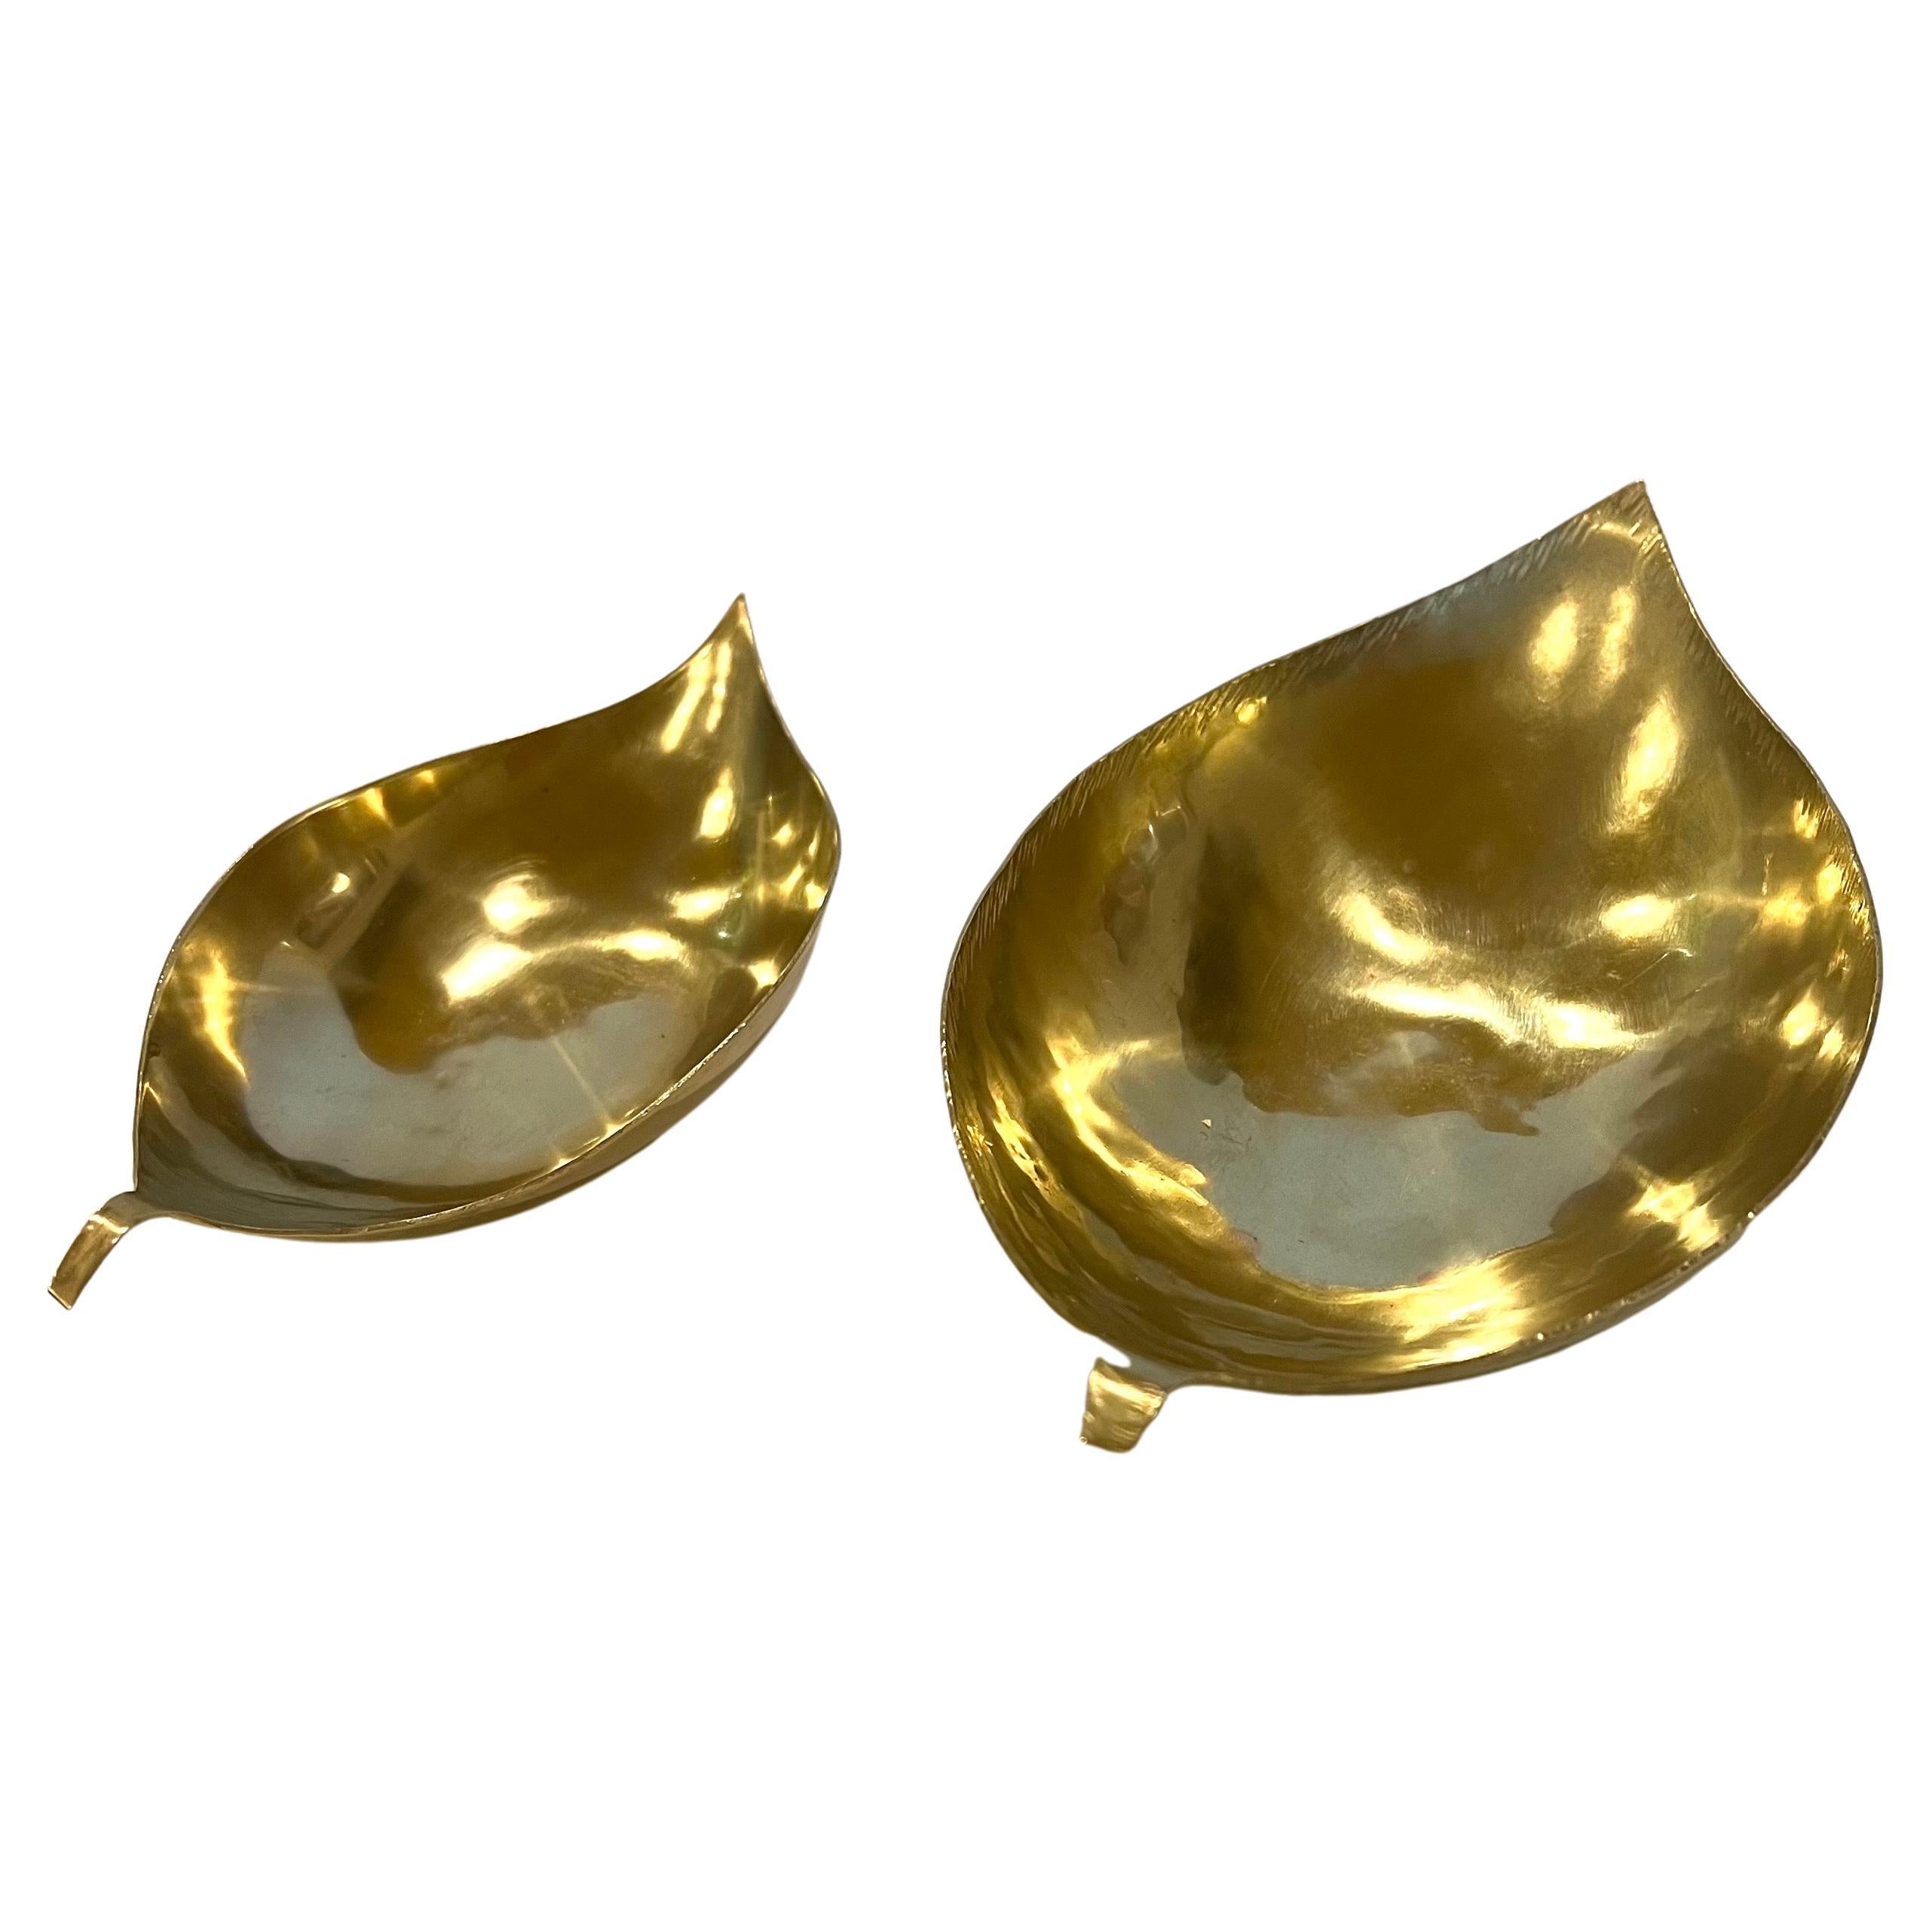 Pair of Solid Polished Brass Small Bowls Catch-it-all For Sale